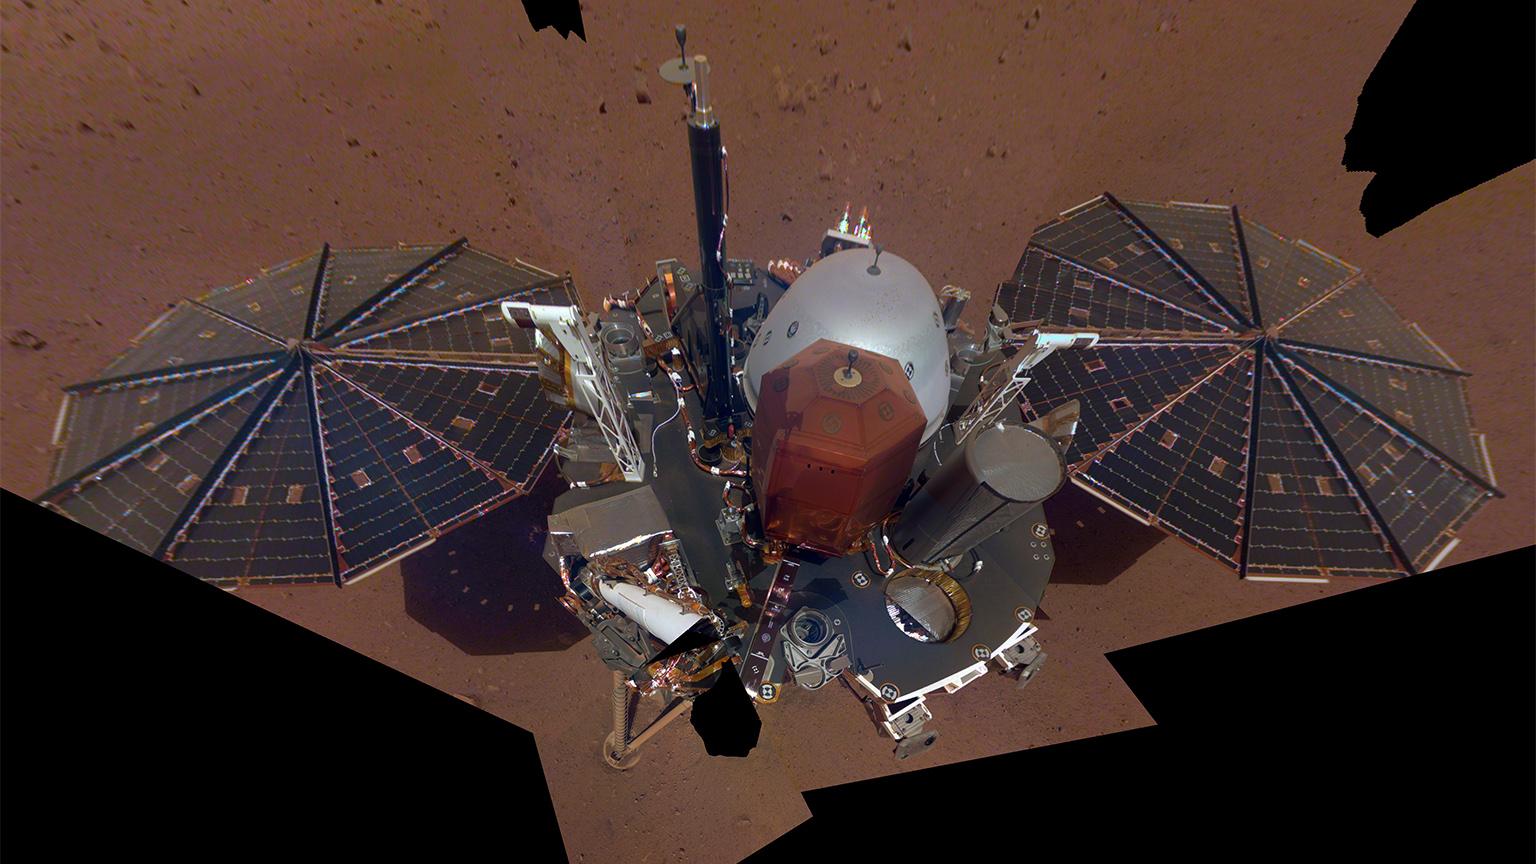 NASA InSight’s first full “selfie” on Mars, taken Dec. 6, 2018, displays the lander’s solar panels and deck. On top of the deck are its science instruments, weather sensor booms and UHF antenna. (Credit: NASA / JPL-Caltech)